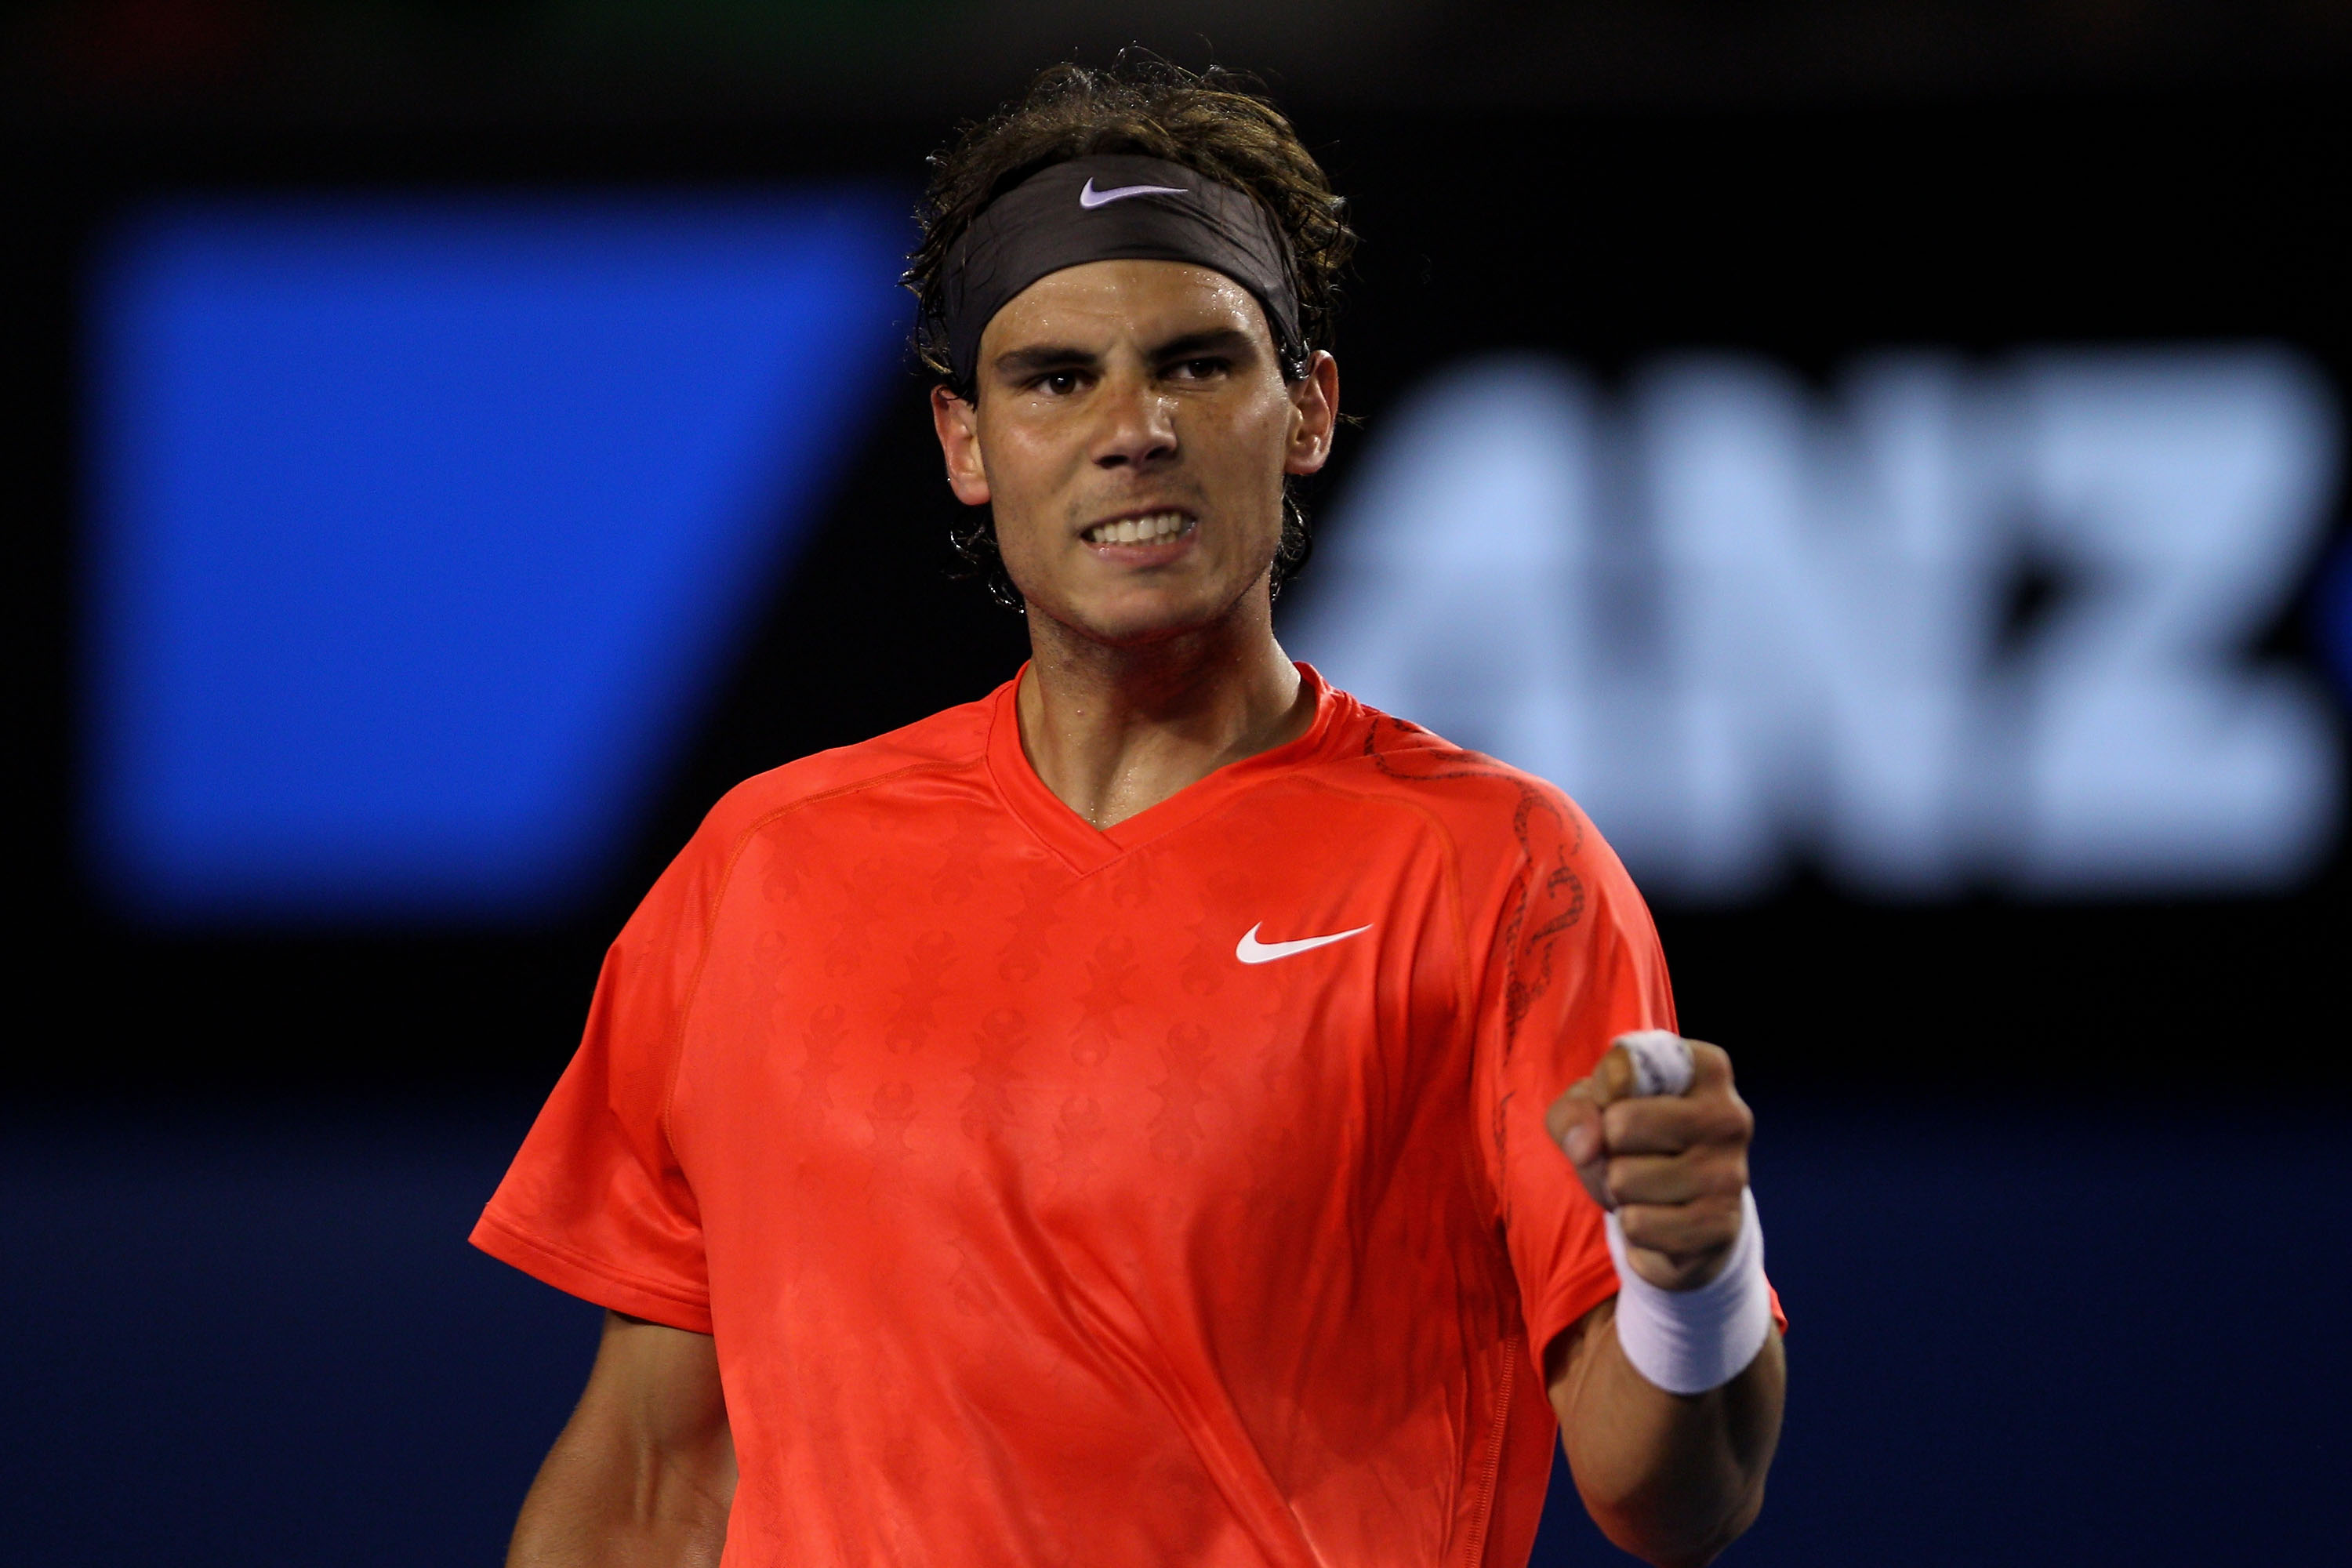 MELBOURNE, AUSTRALIA - JANUARY 24:  Rafael Nadal of Spain celebrates match point after winning his fourth round match against Marin Cilic of Croatia during day eight of the 2011 Australian Open at Melbourne Park on January 24, 2011 in Melbourne, Australia